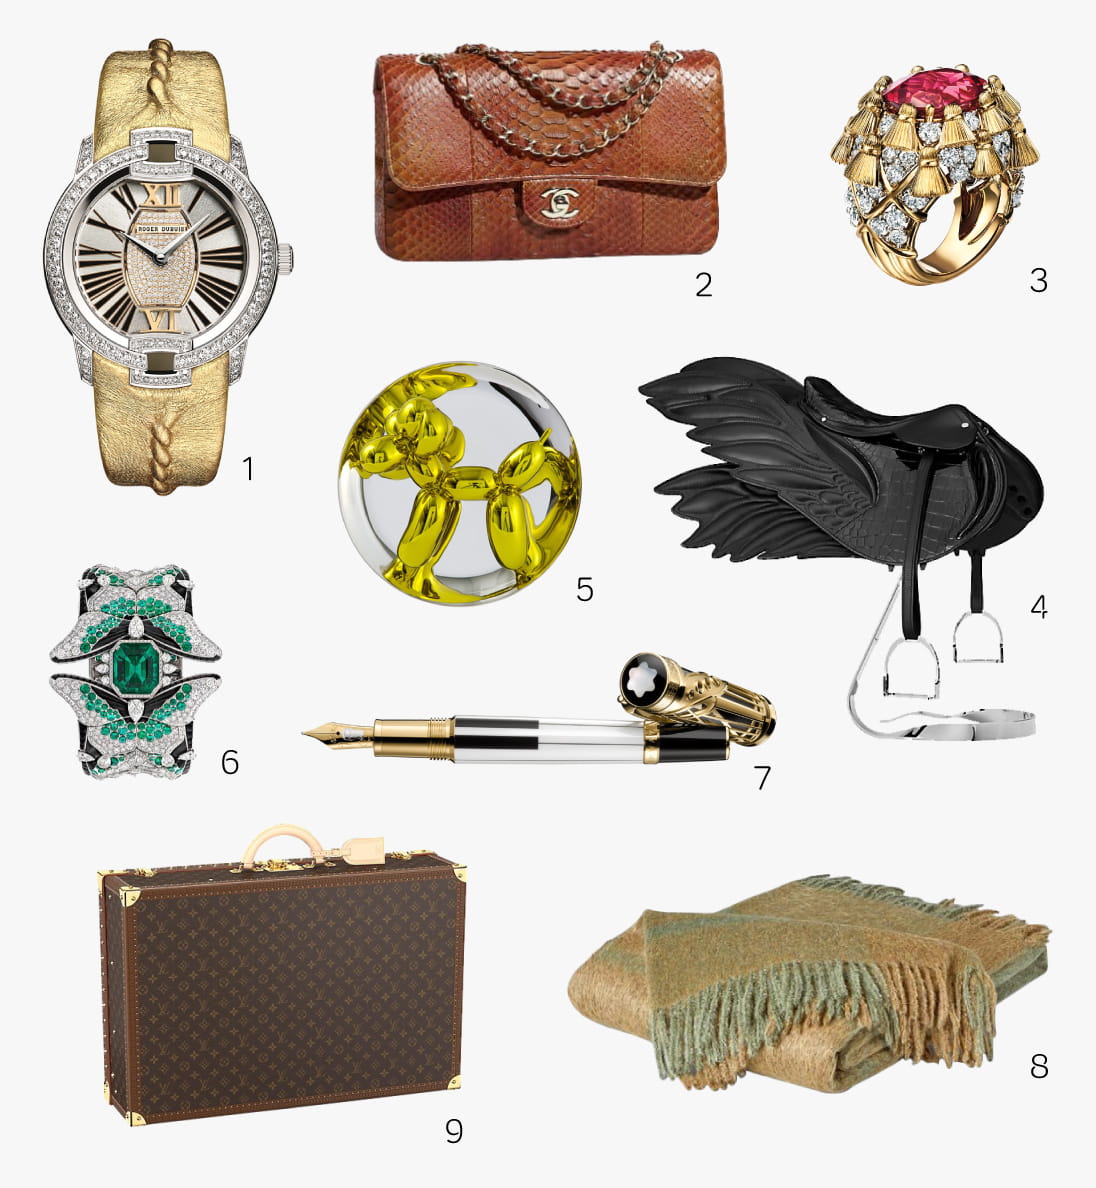 The luxurious Christmas gift ideas that are topping our Christmas wish list